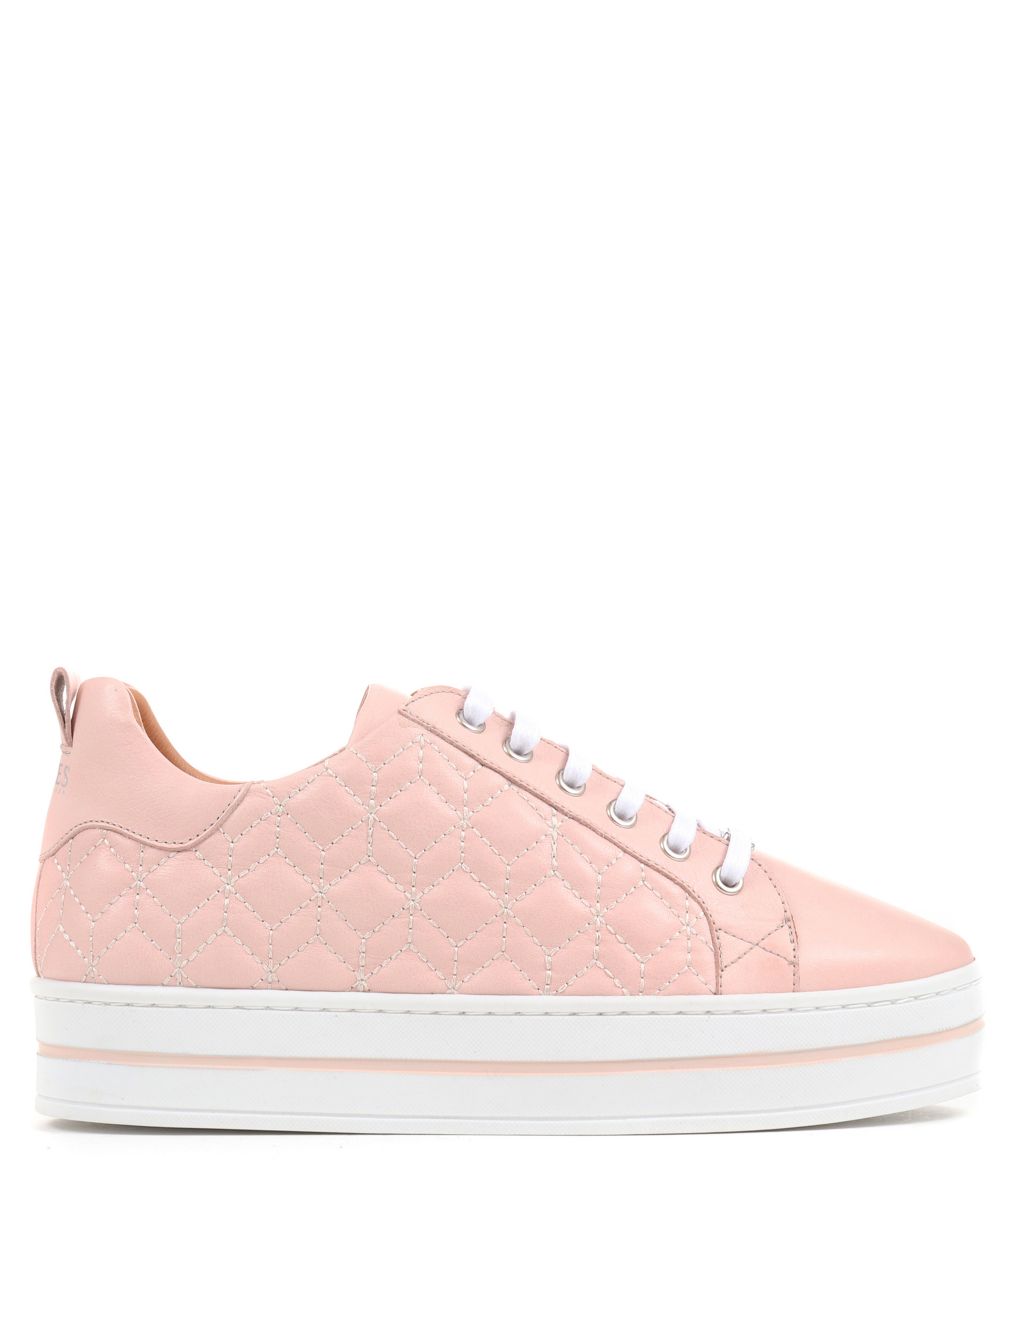 Leather Lace Up Chunky Trainers image 4